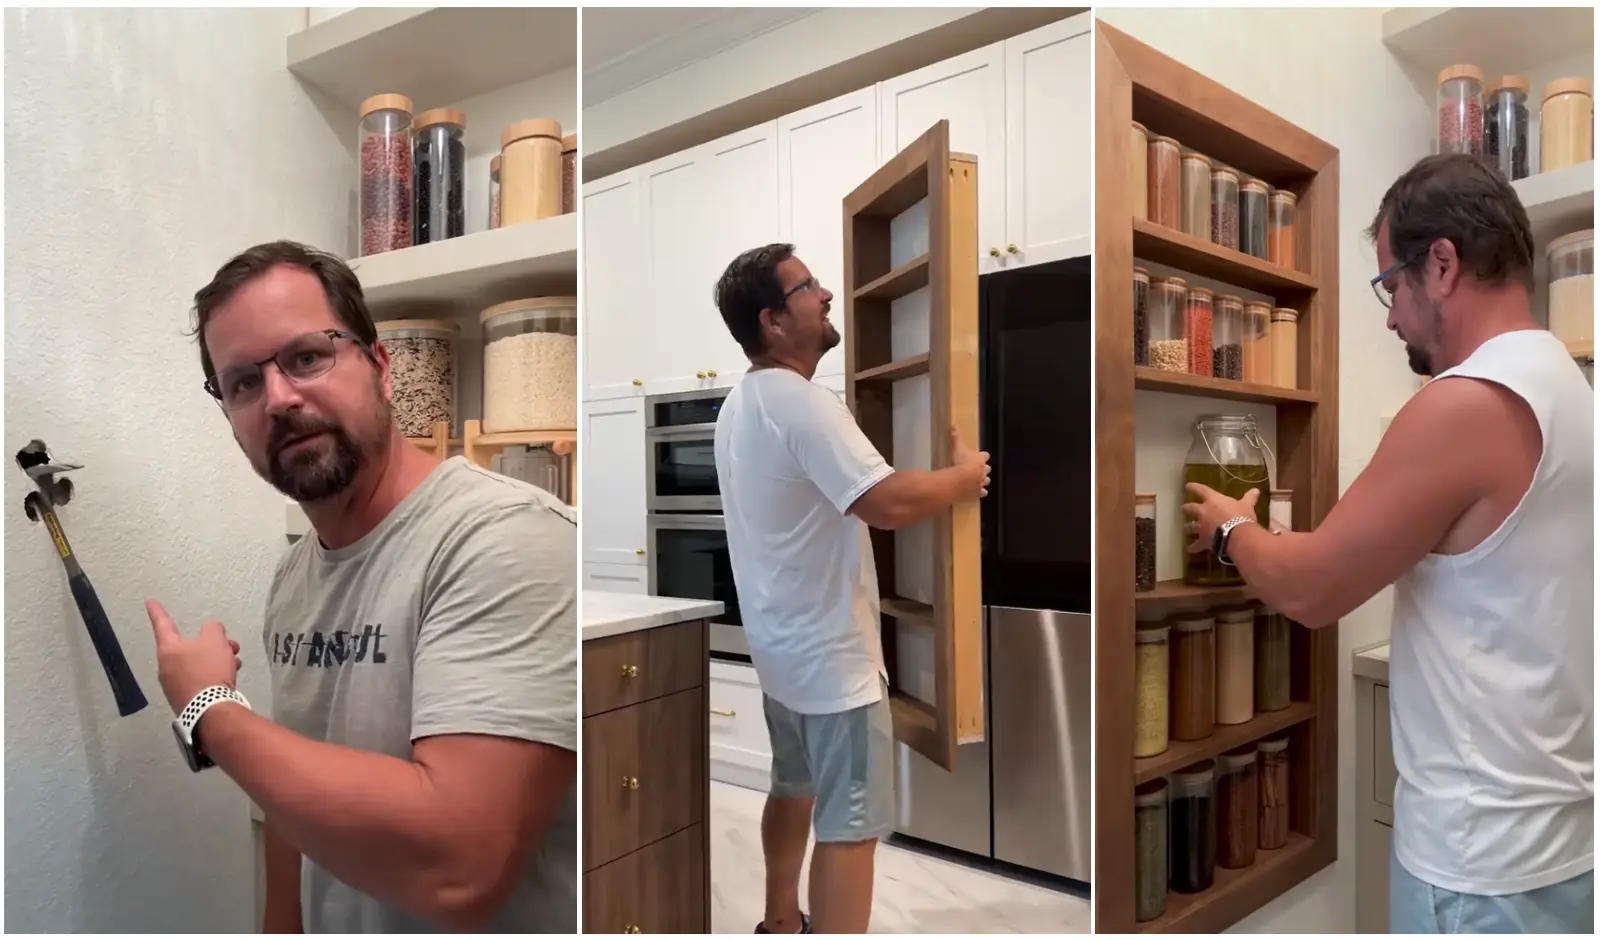 This Handy Husband's Spice Cupboard DIY Will Make You Jealous